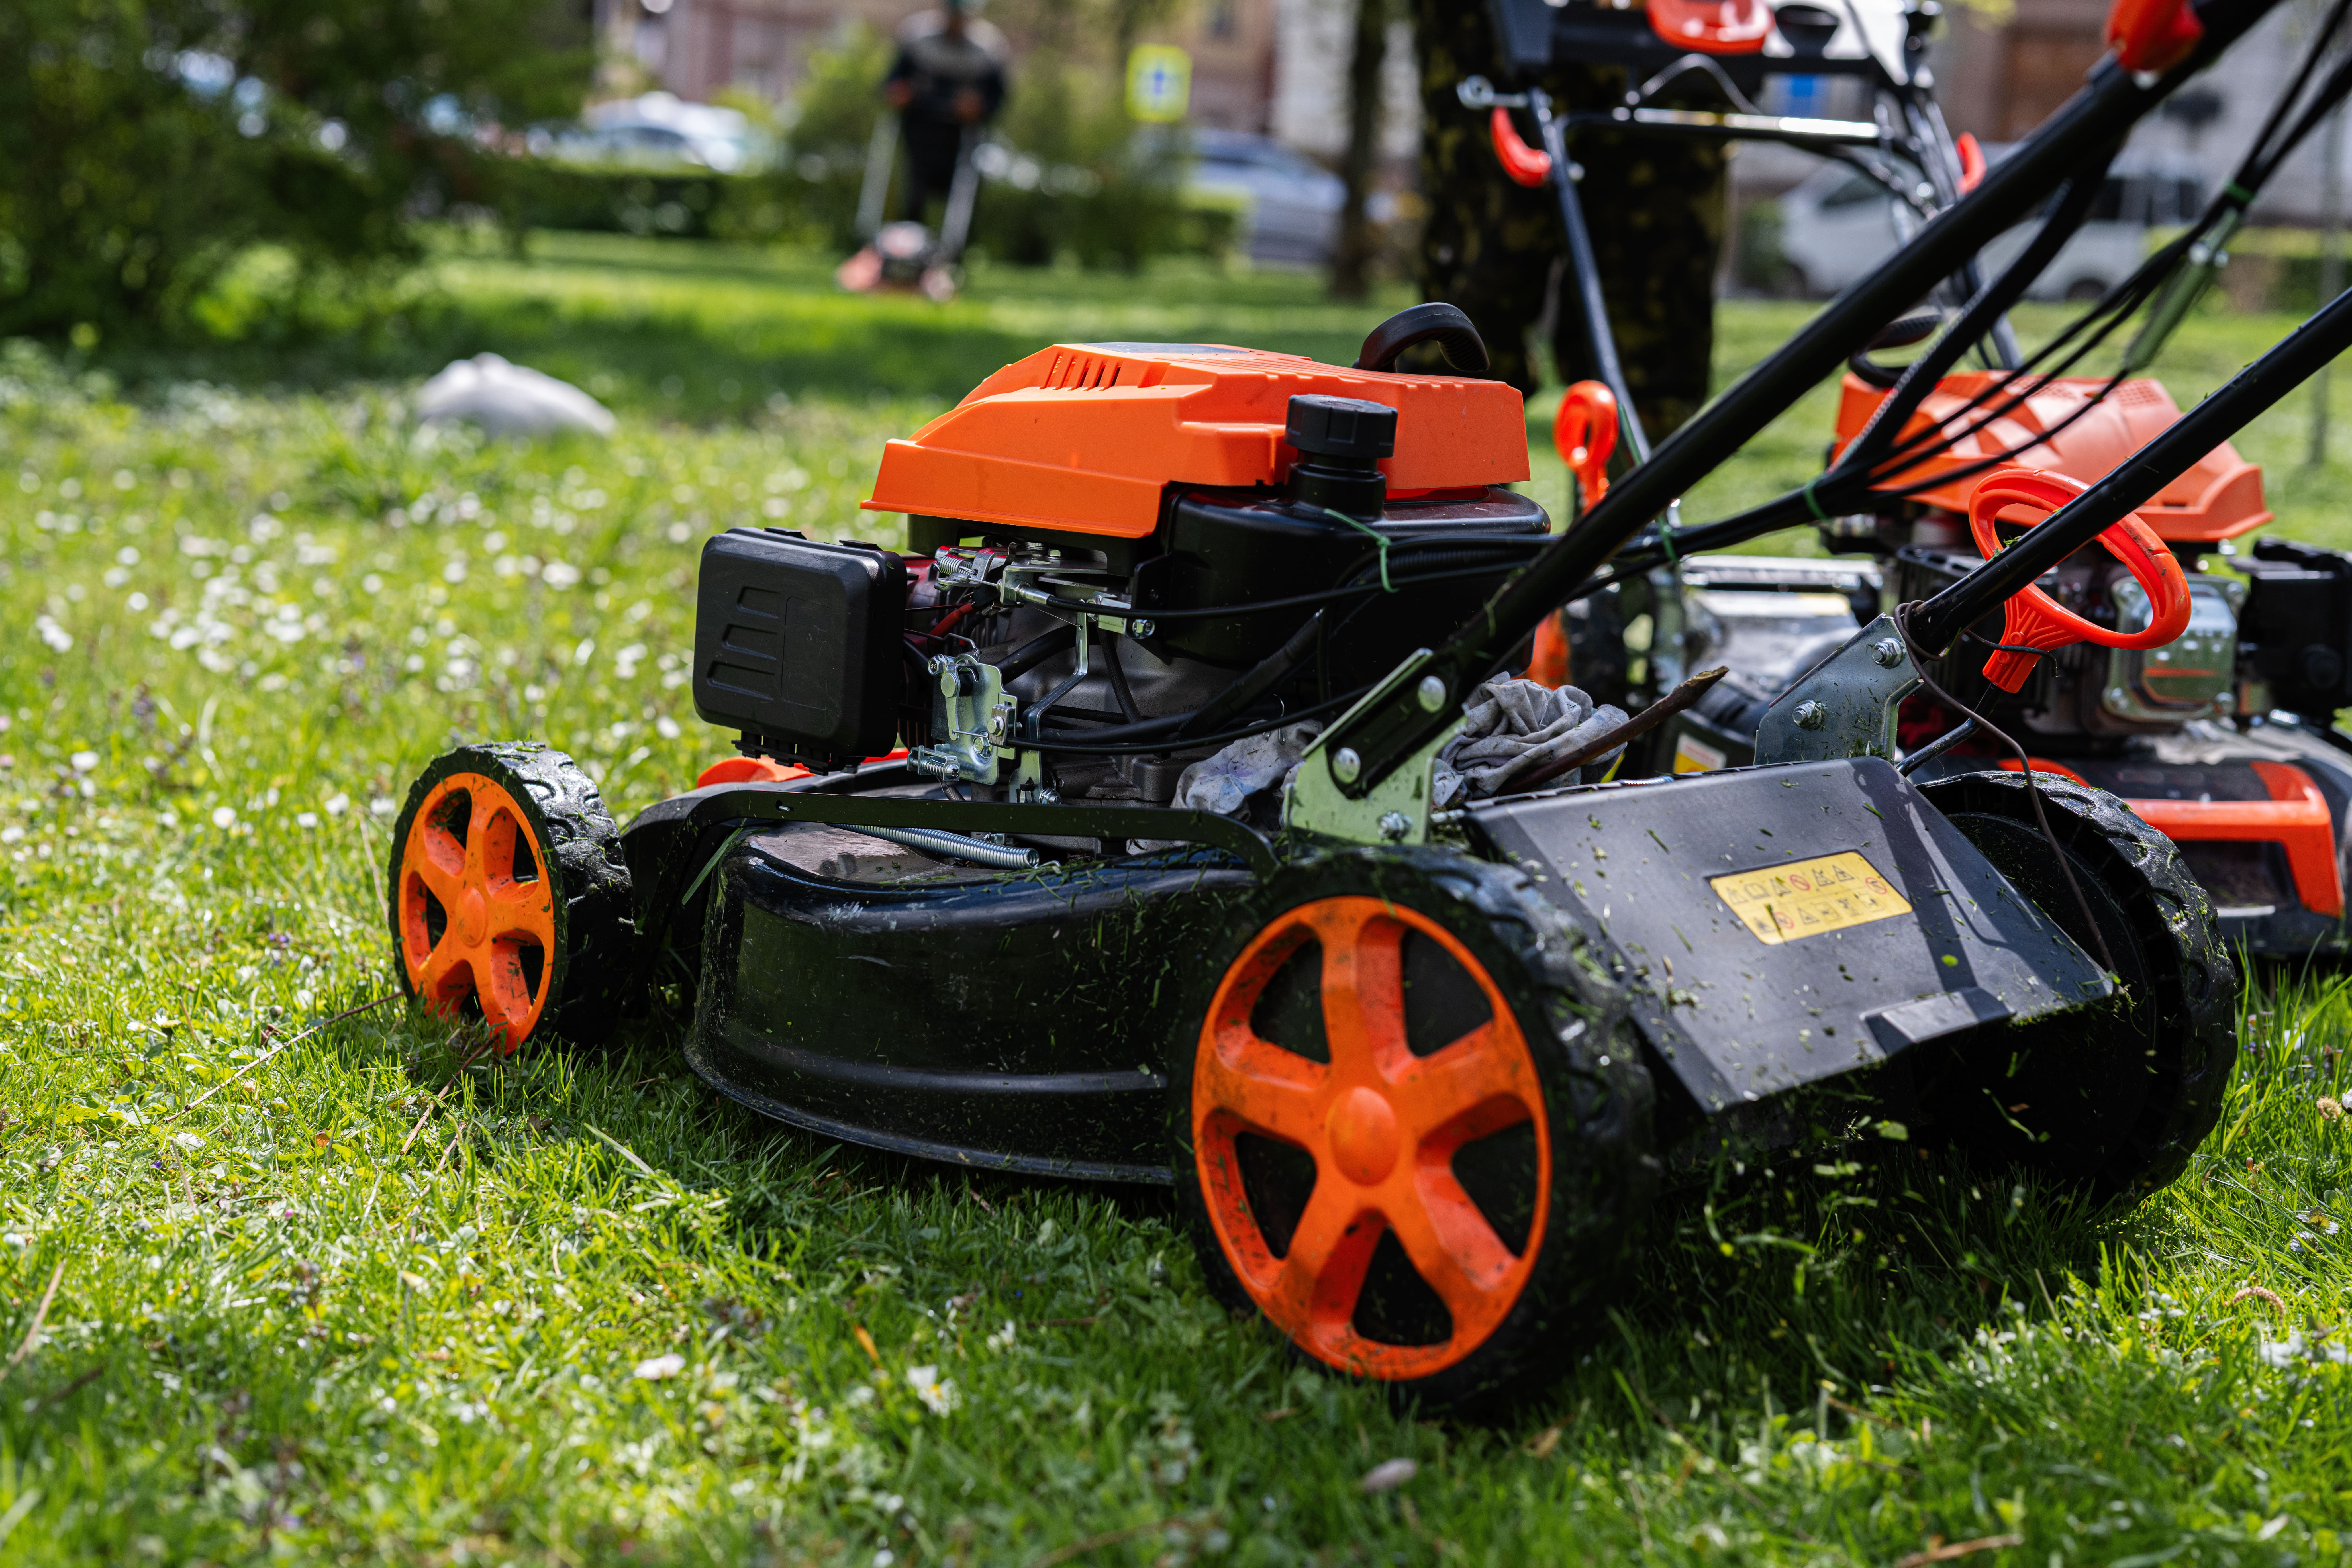 A photograph of a gardener or communal services worker, a man, using a lawn mower to cut the grass in a city park or urban green space